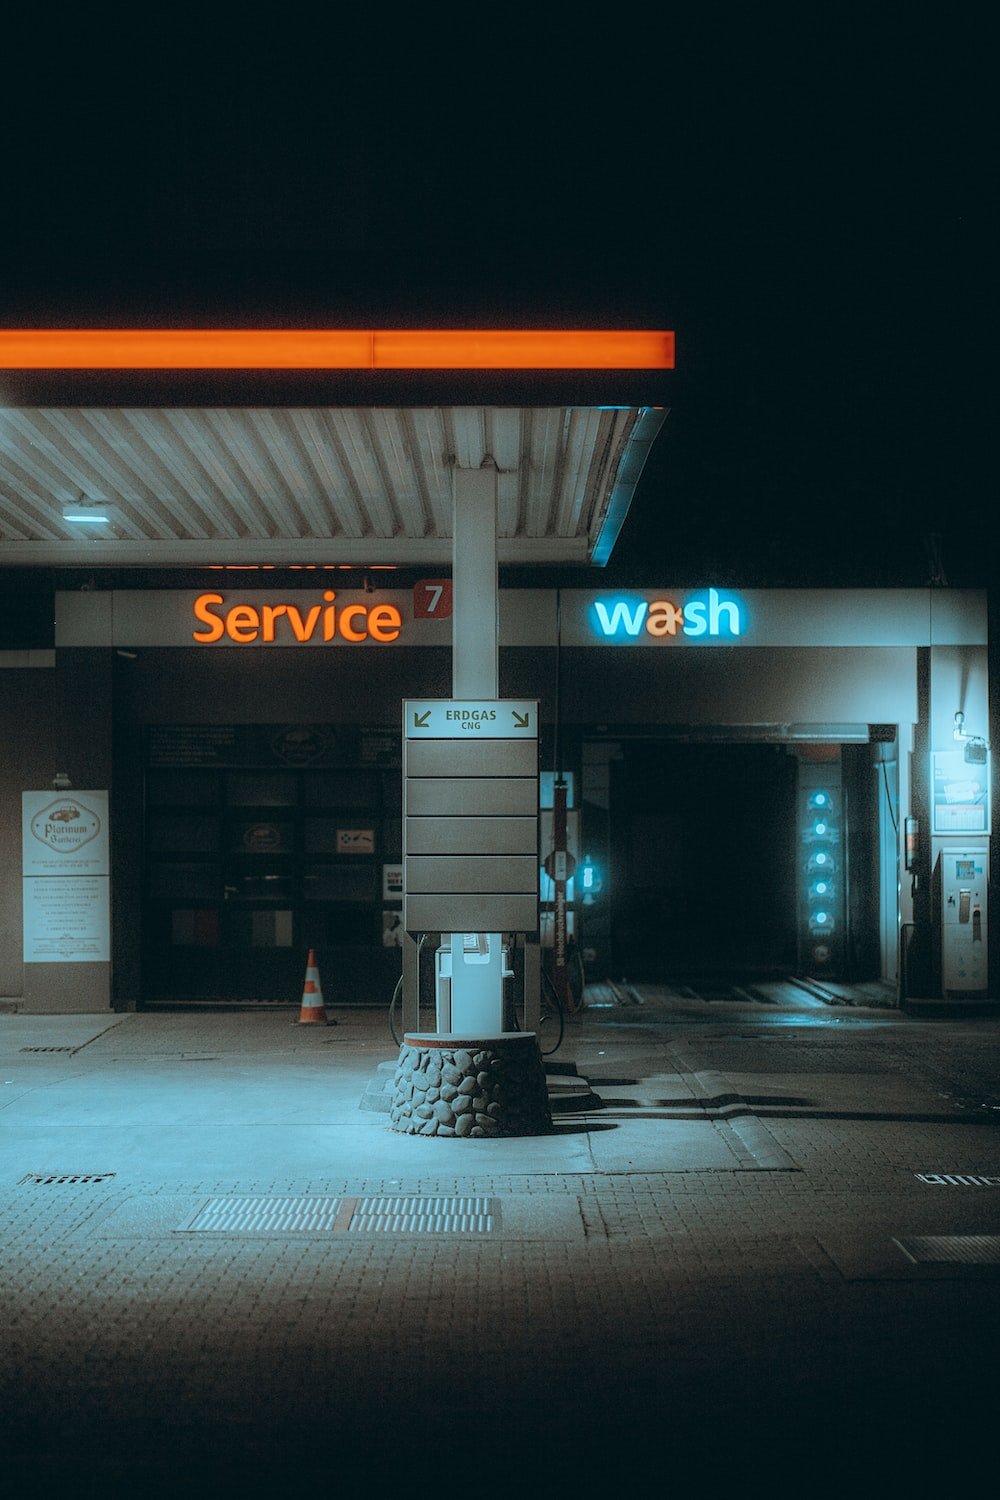 Gas Station Night Picture. Download Free Image